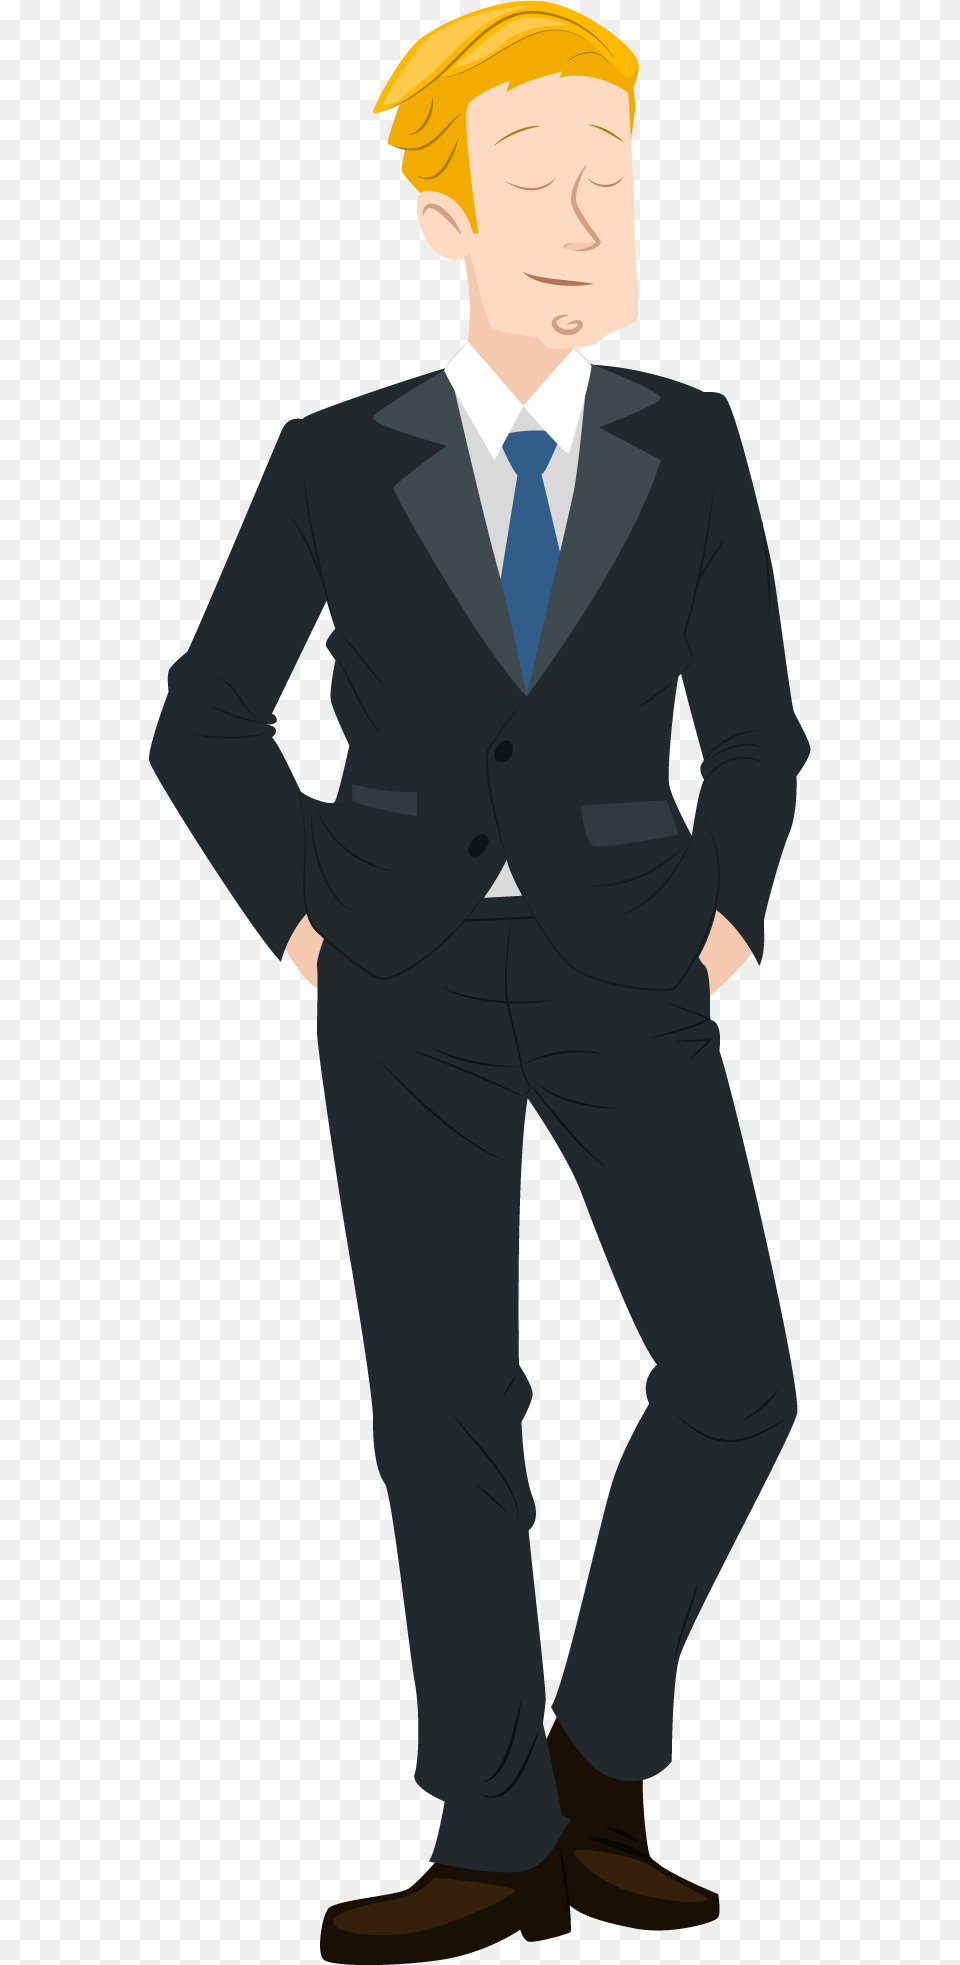 Collection Of Man In Suit Clipart Man Suit Clipart, Accessories, Tie, Tuxedo, Formal Wear Free Png Download